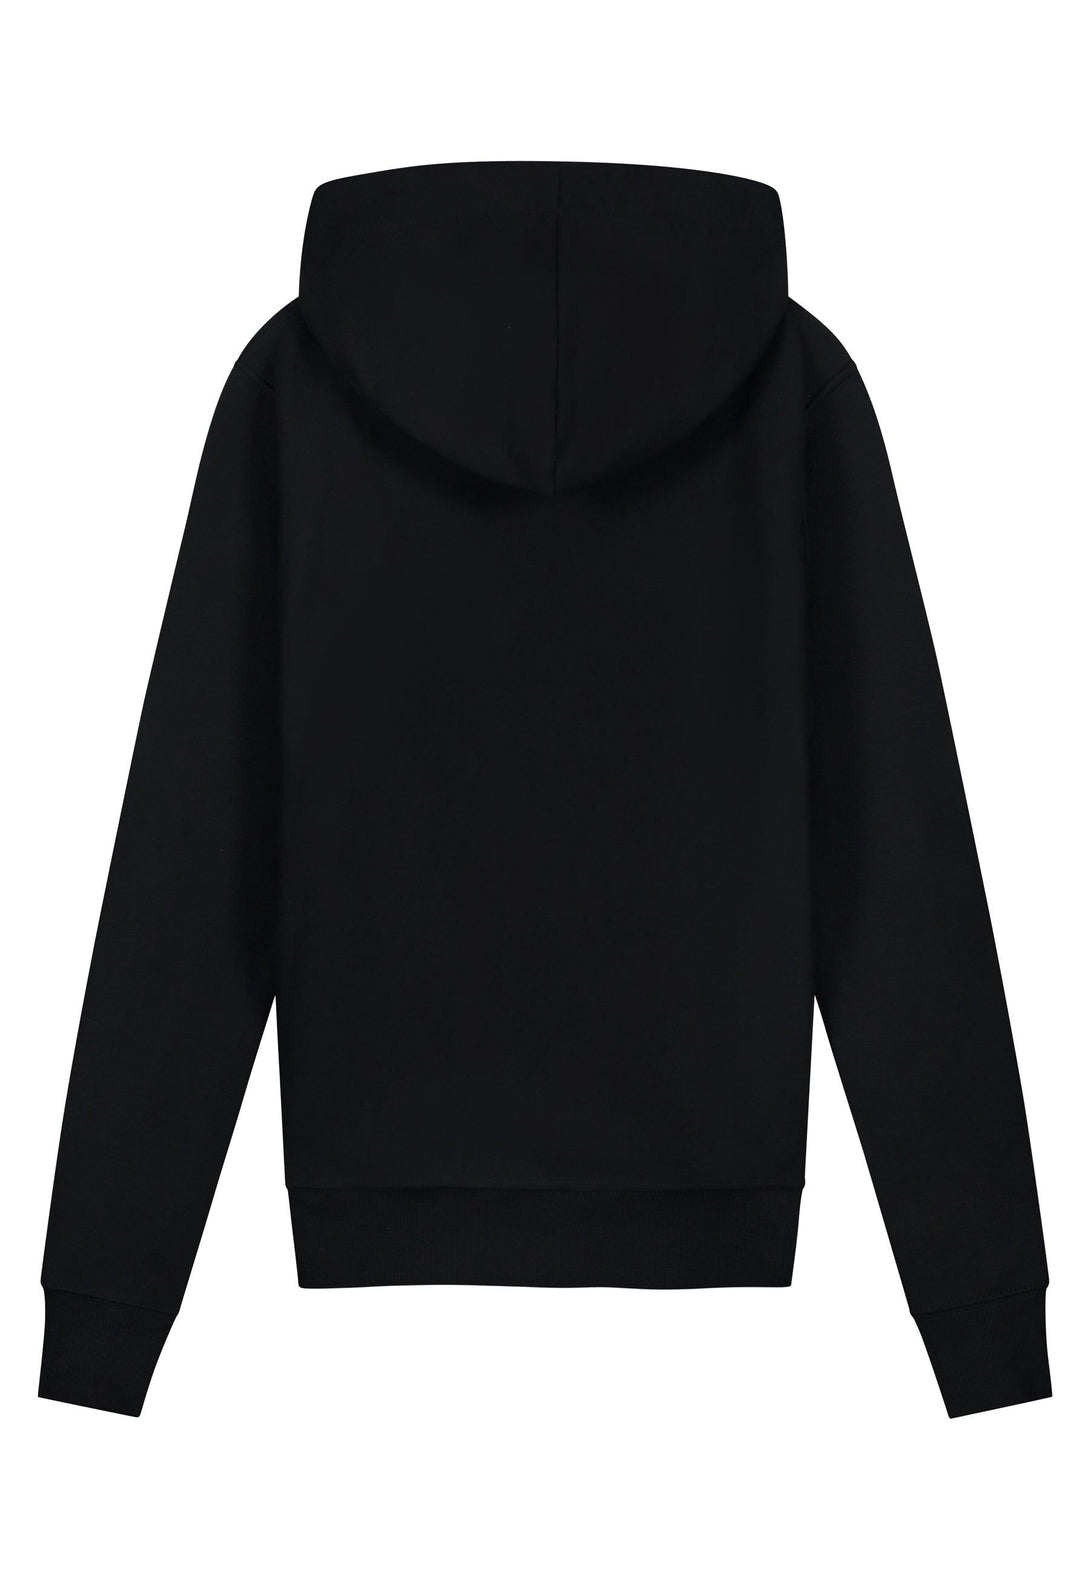 Black hoodie Amsterdam – Label Collect Artwork The